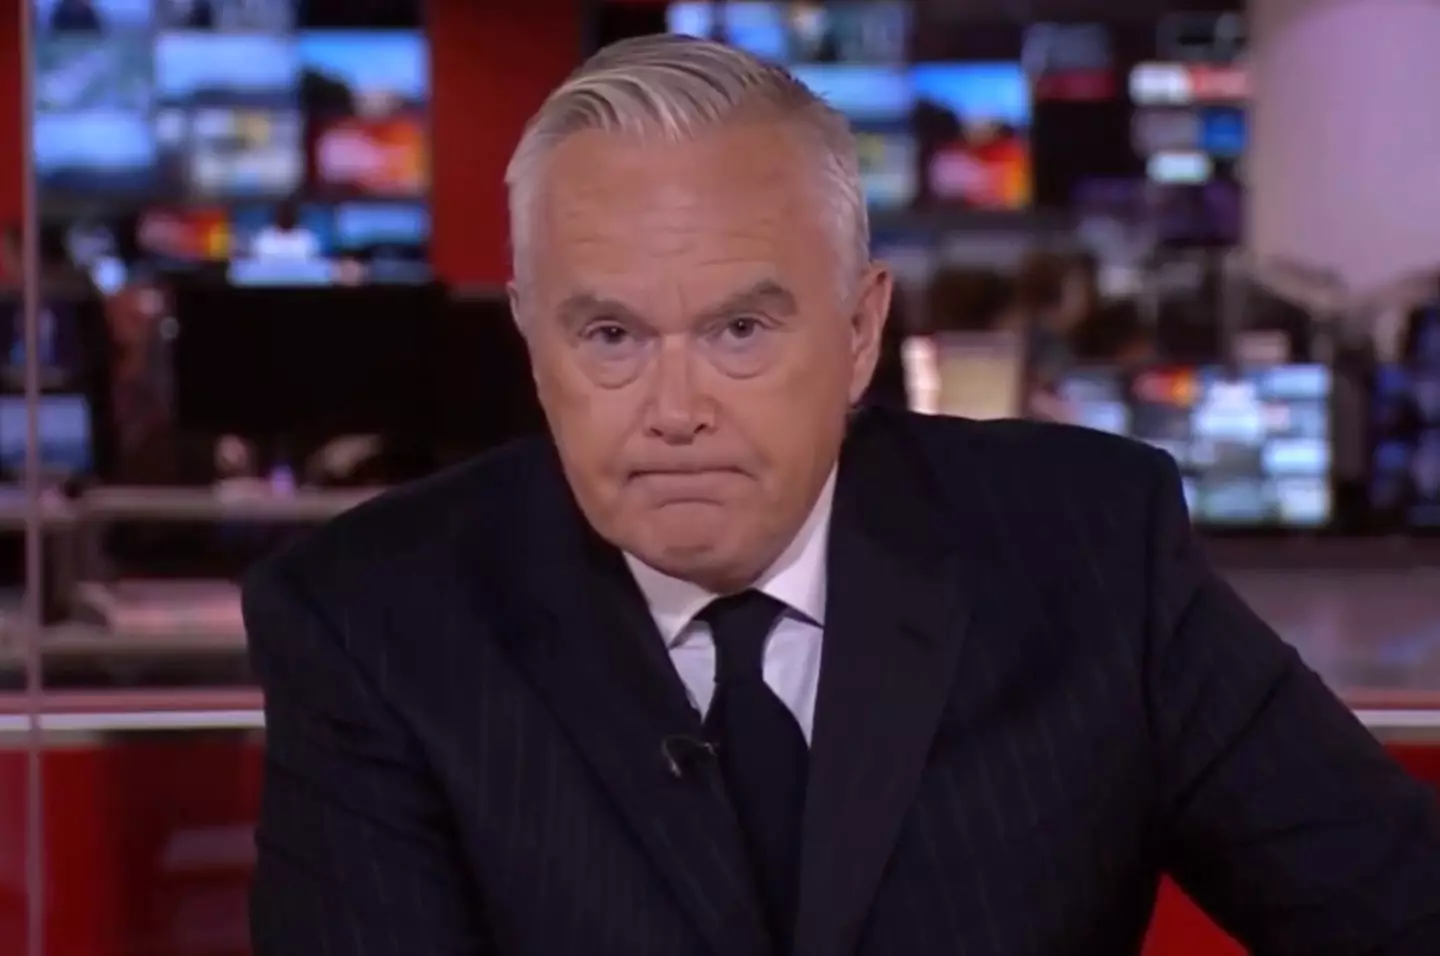 Huw Edwards held back the tears following news of the Queen's death.